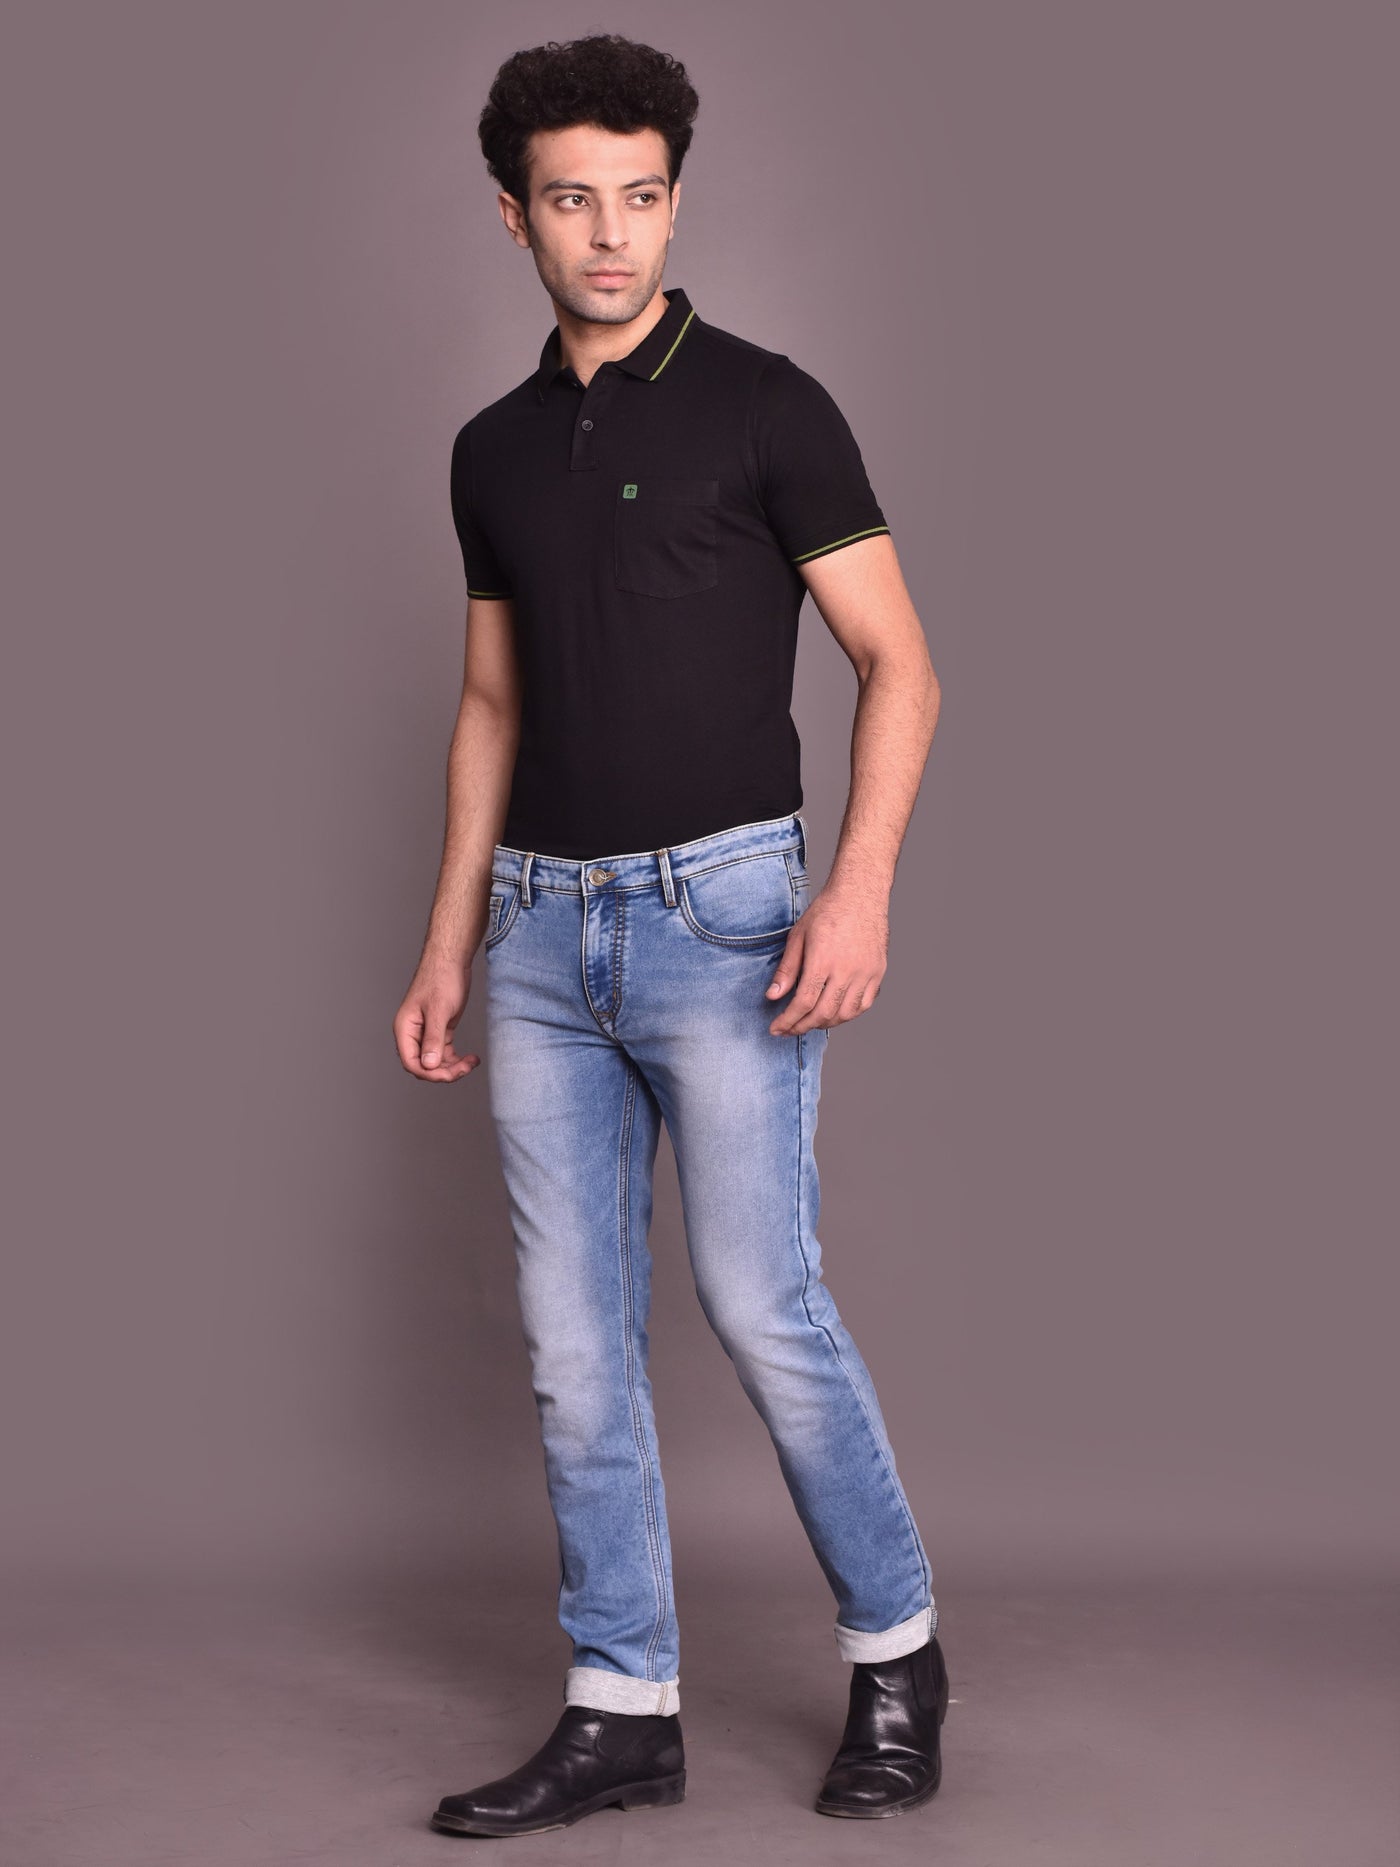 Cool Blue Narrow Fit Stretchable Causal Denim for Men